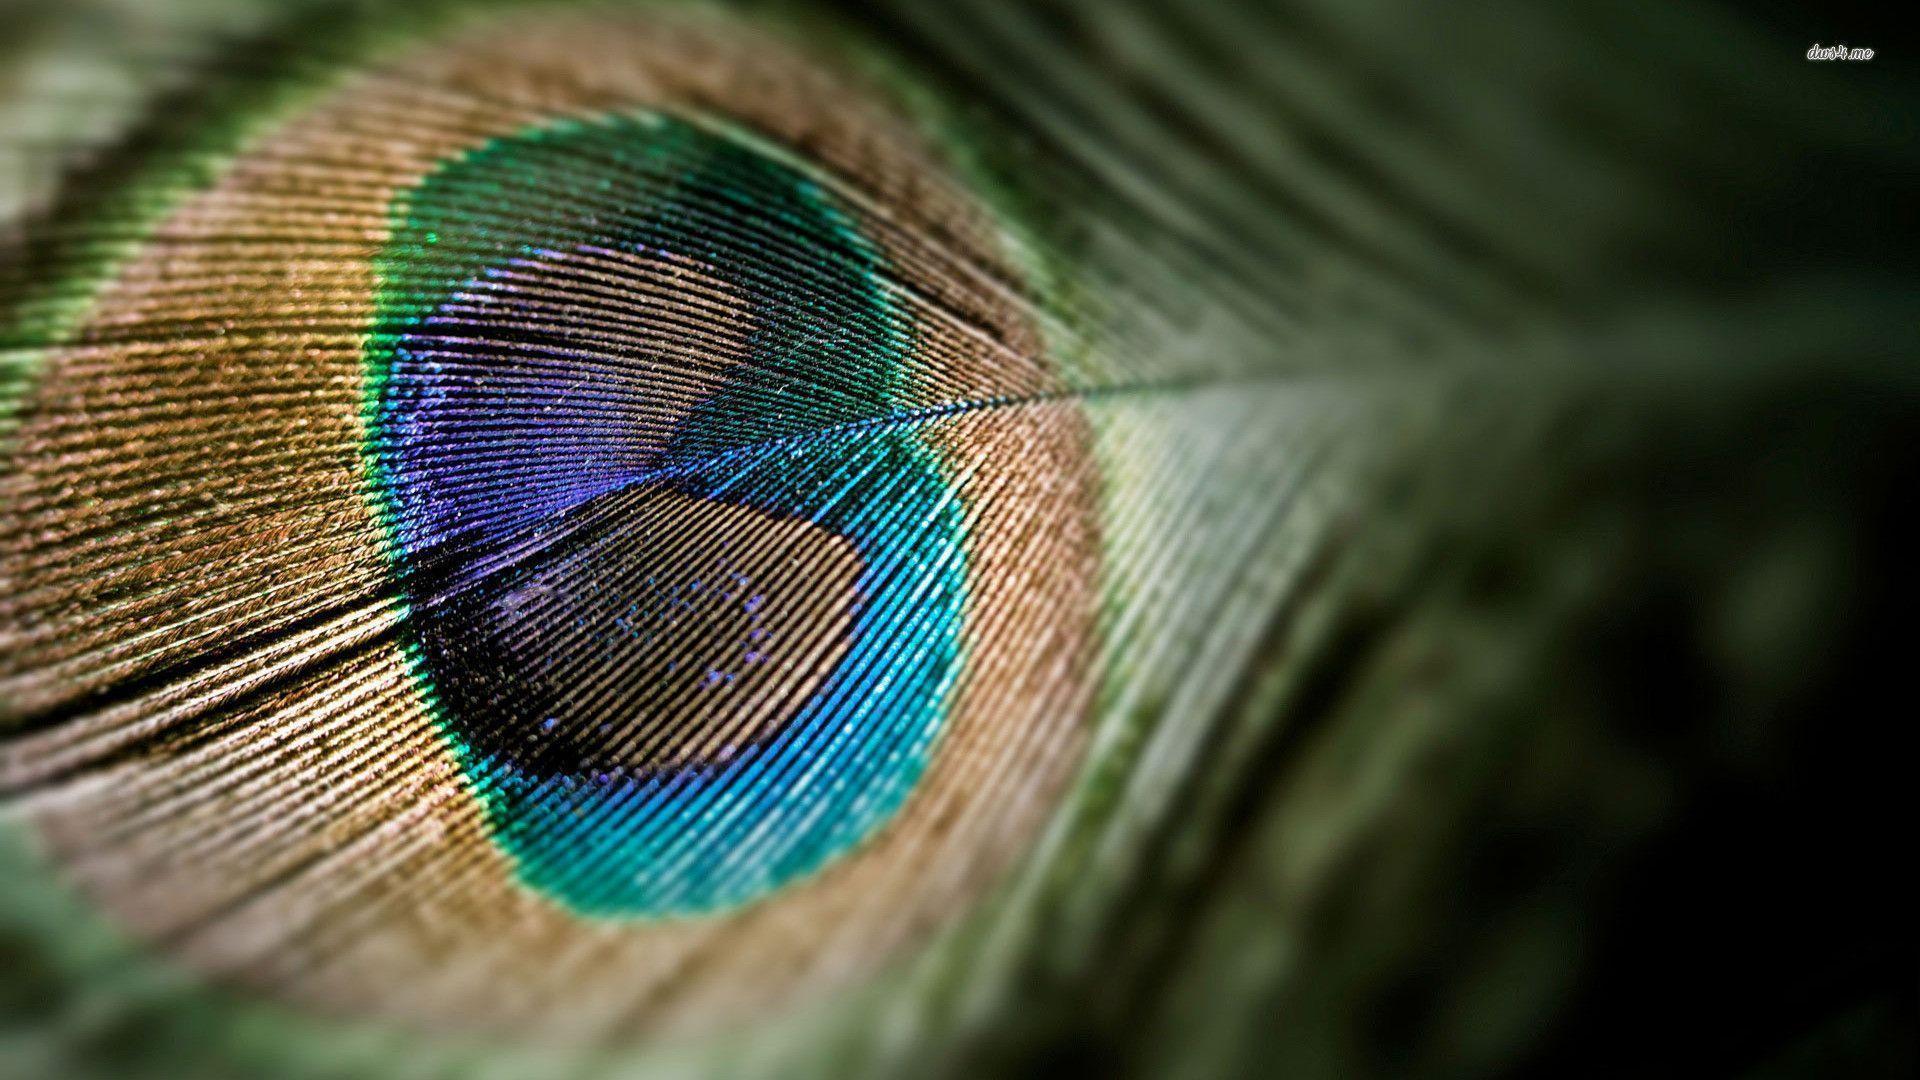 Wallpapers Of Peacock Feathers HD 2015 - Wallpaper Cave